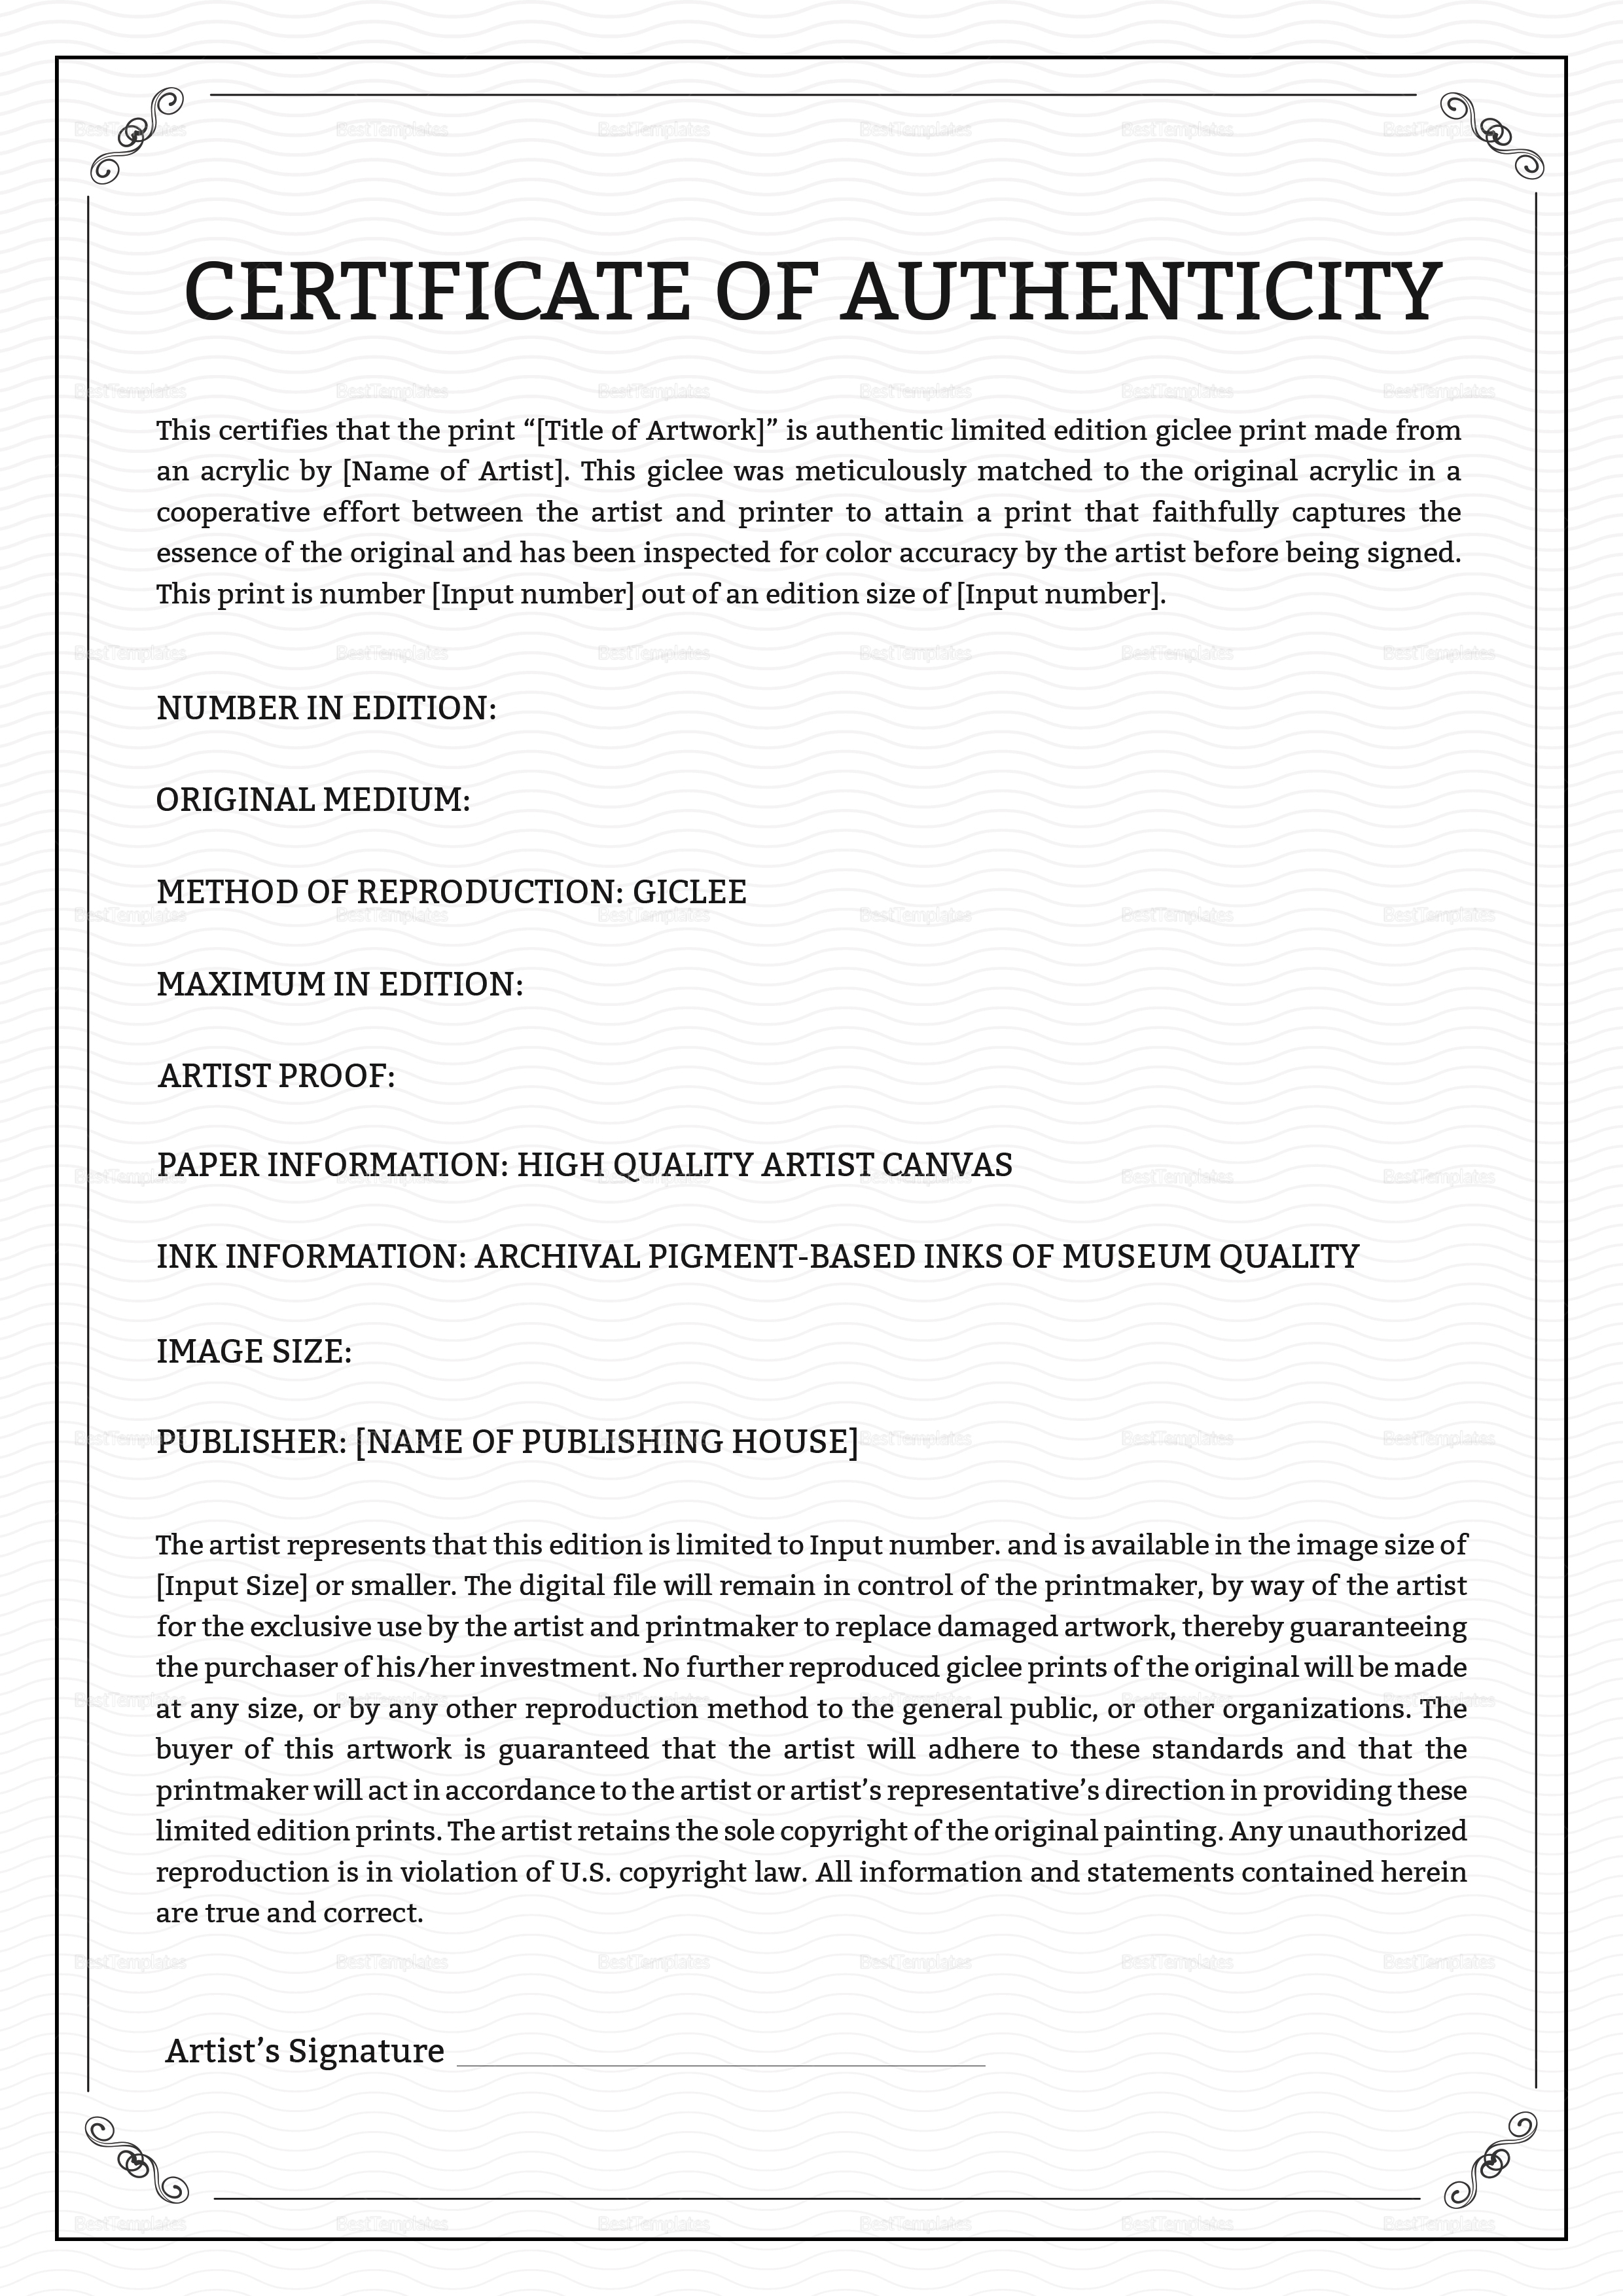 Print Authenticity Certificate Template Pertaining To Certificate Of Authenticity Photography Template